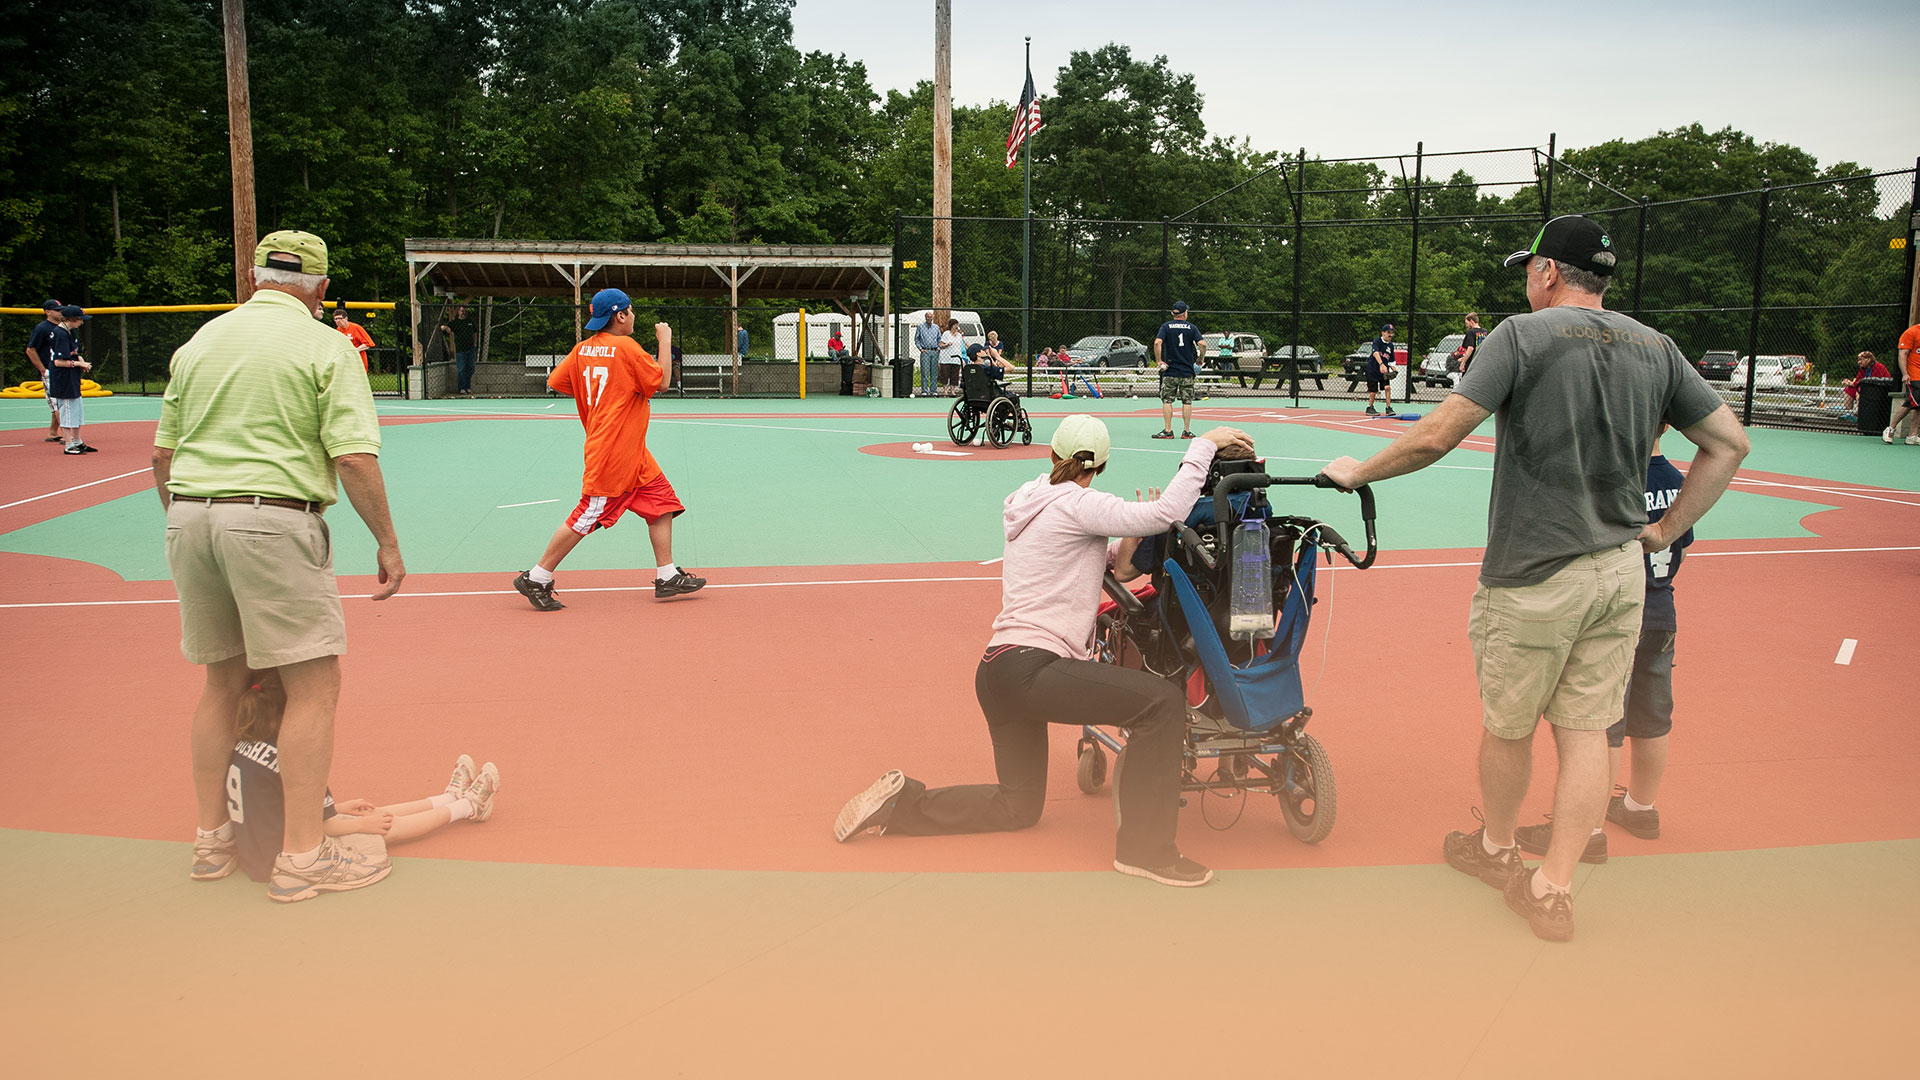 Miracle League Playing Baseball on Field